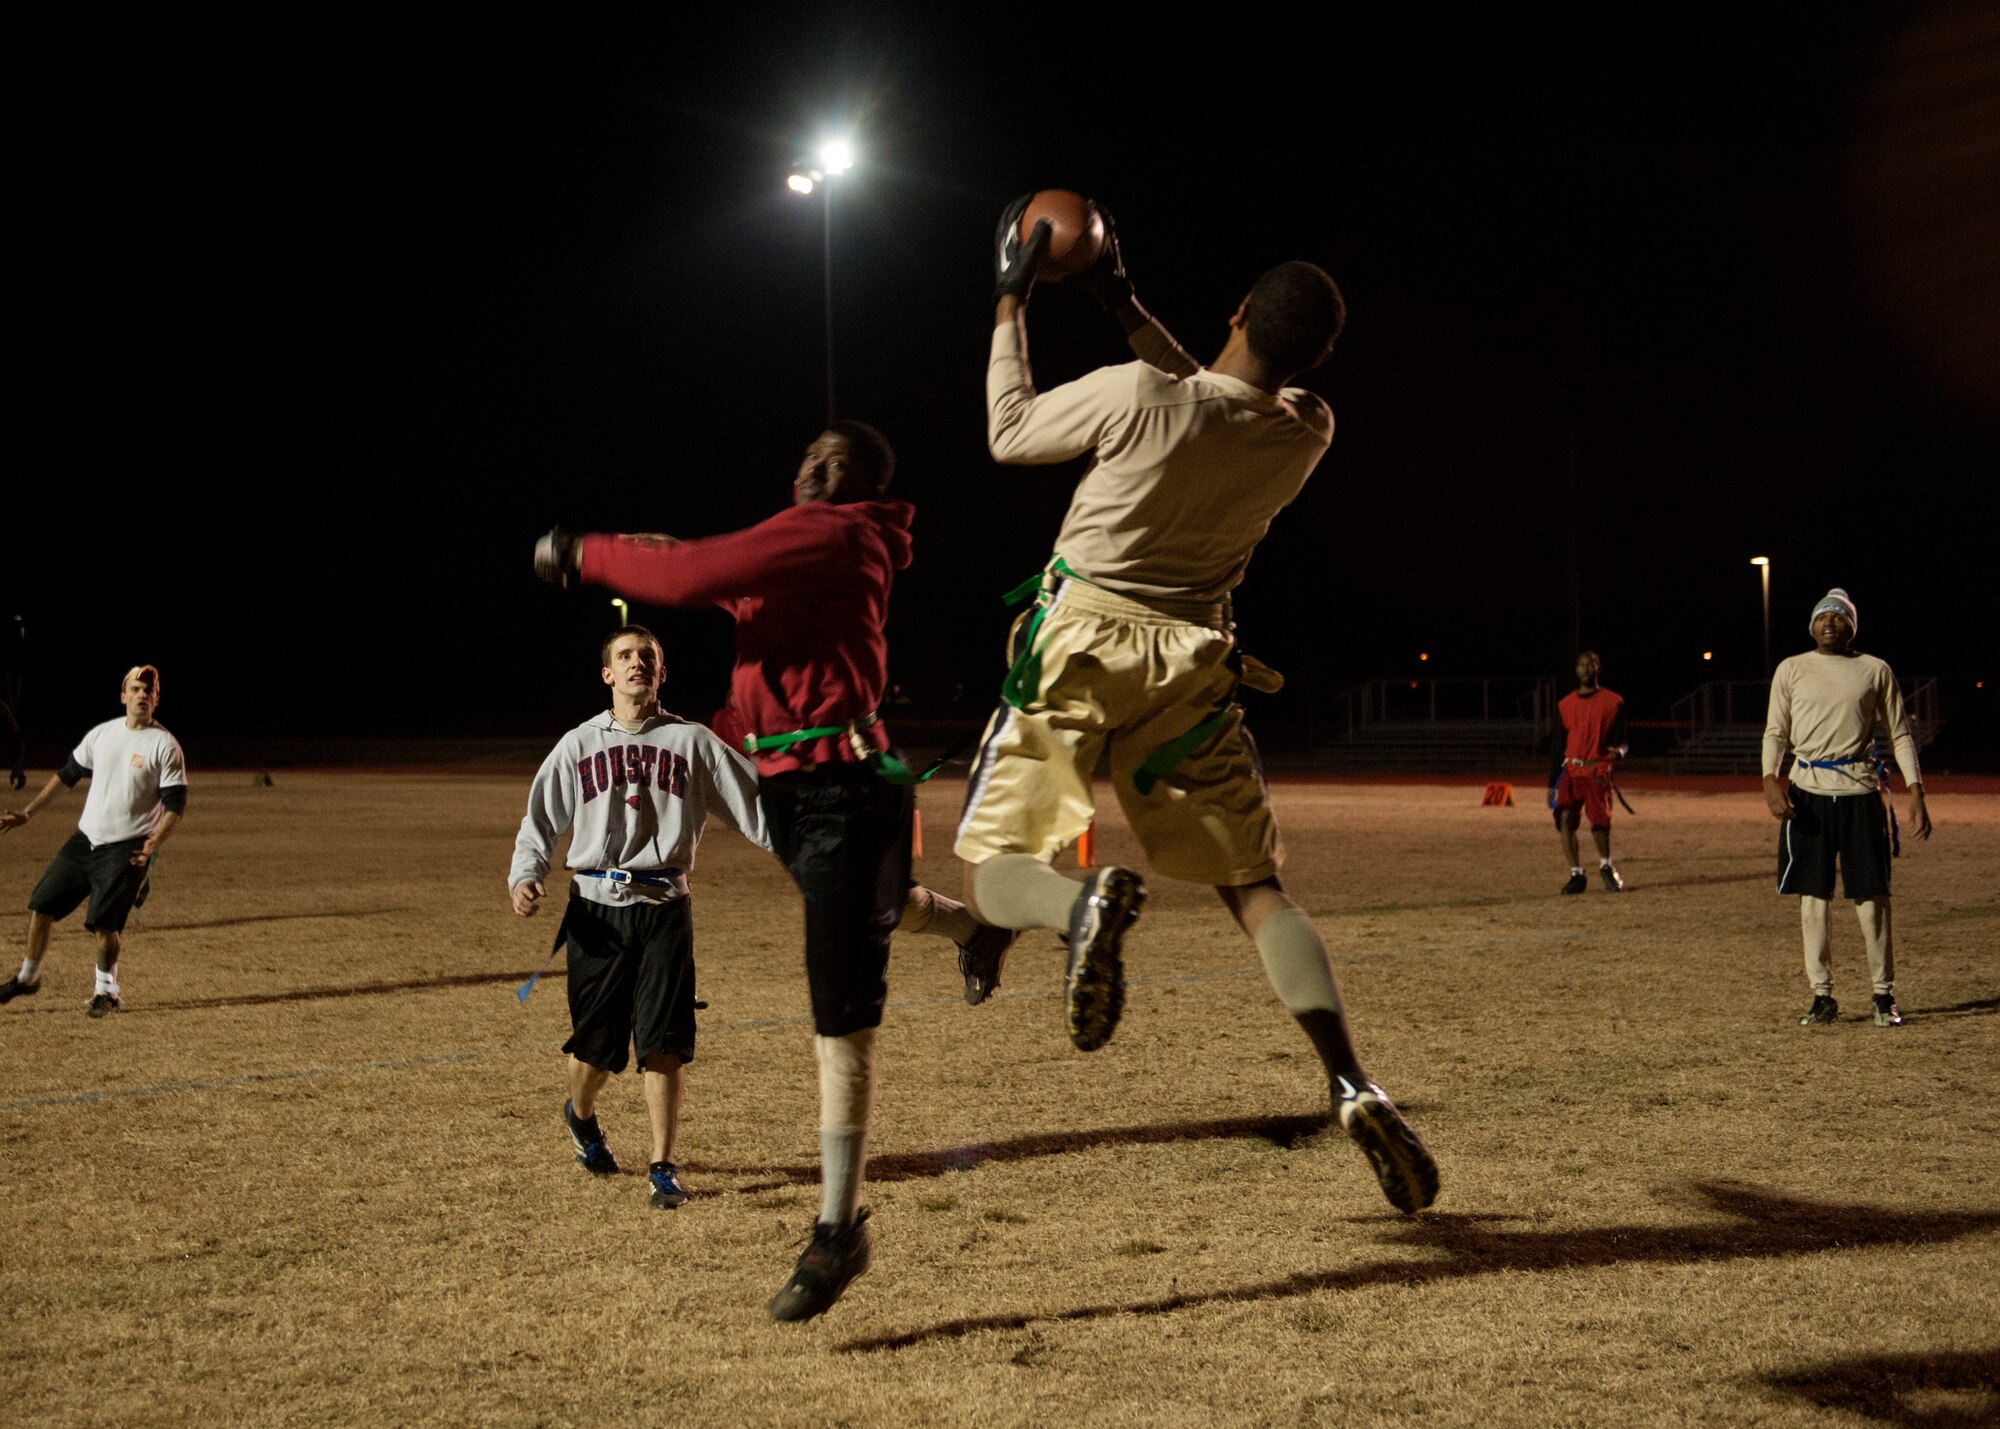 A receiver from the 19th Maintenance Squadron intramural football team #2 completes a touchdown pass Dec. 10, 2014, at Little Rock Air Force Base, Ark. The 19th MXS # 2 and #3 battled it out, team #2 won 27-21. (U.S. Air Force photo by Airman 1st Class Scott Poe)